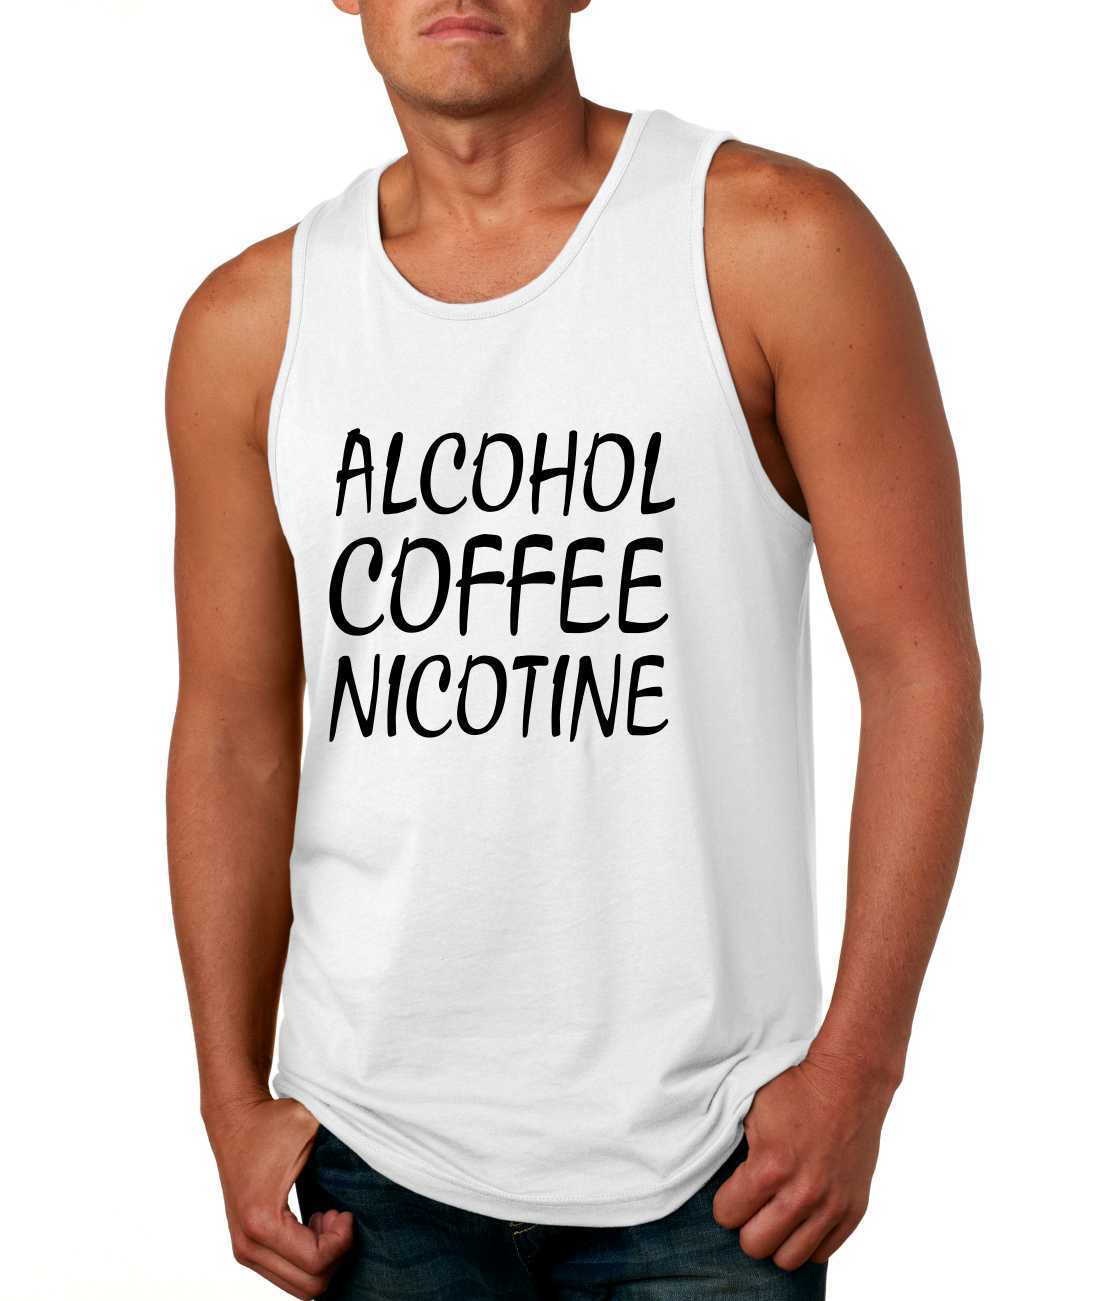 Primary image for Men's Tank Top Alcohol Coffee Nicotine Cool Funny Top